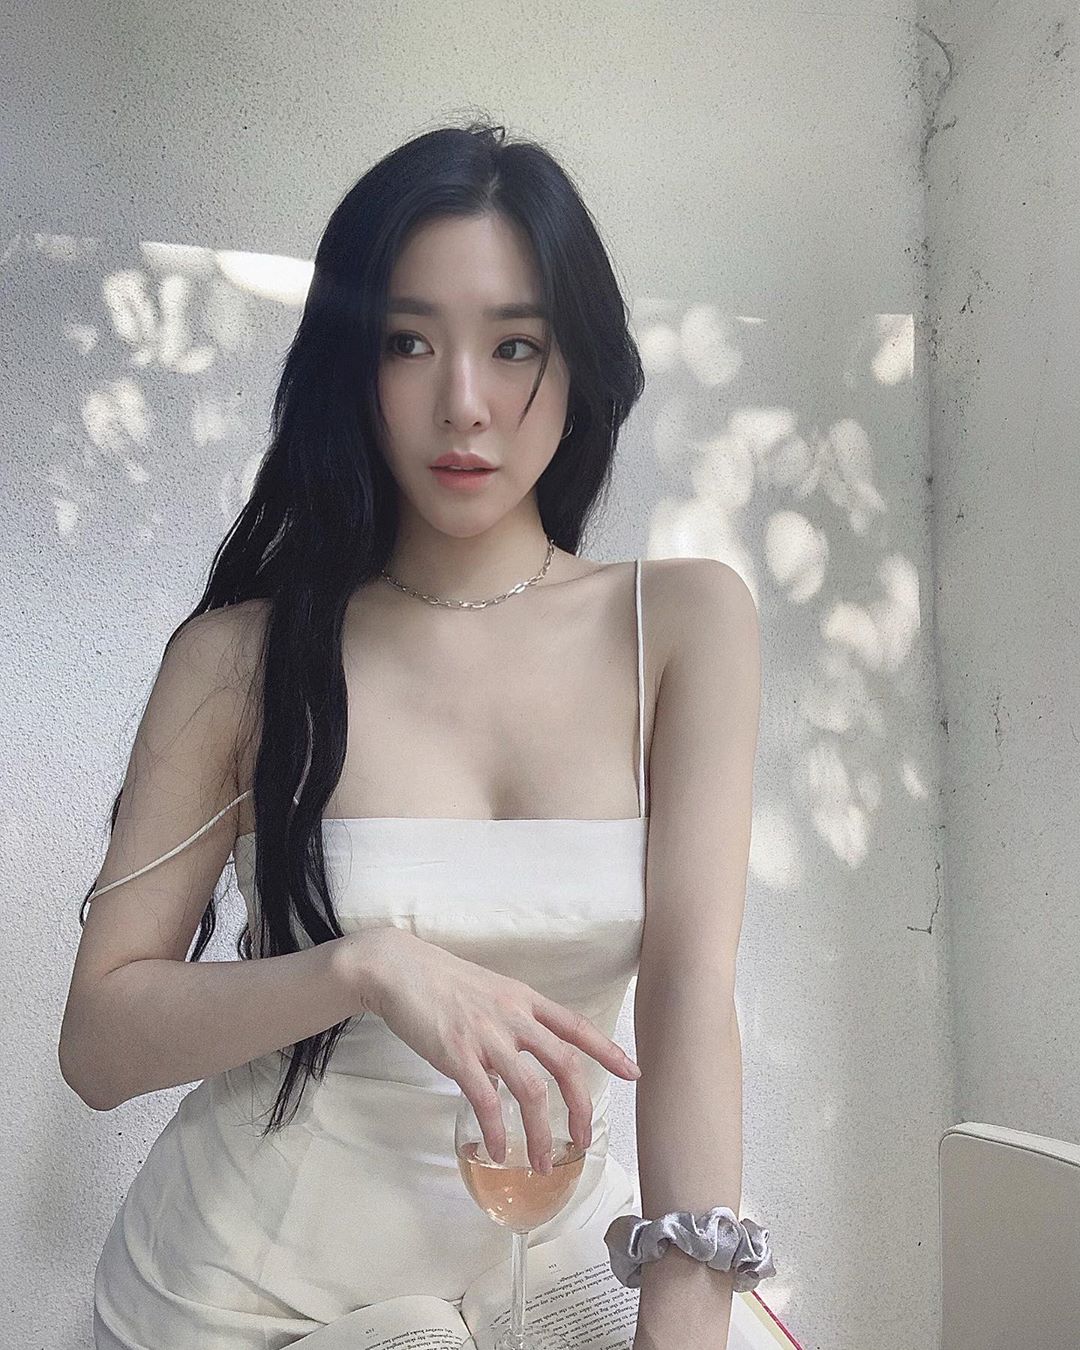 Tiffany Young, a singer from the group Girls Generation, told the recent news.Tiffany Young posted a picture on his 27th day with an article entitled read, rose, relax, repeat on his instagram.Tiffany Young in the open photo is staring somewhere with a wine glass in his hand.White-colored dress and black hair make Tiffany Youngs beauty more prominent.Tiffany Young released Run For Your Life last October.Photo: Tiffany Young Instagram